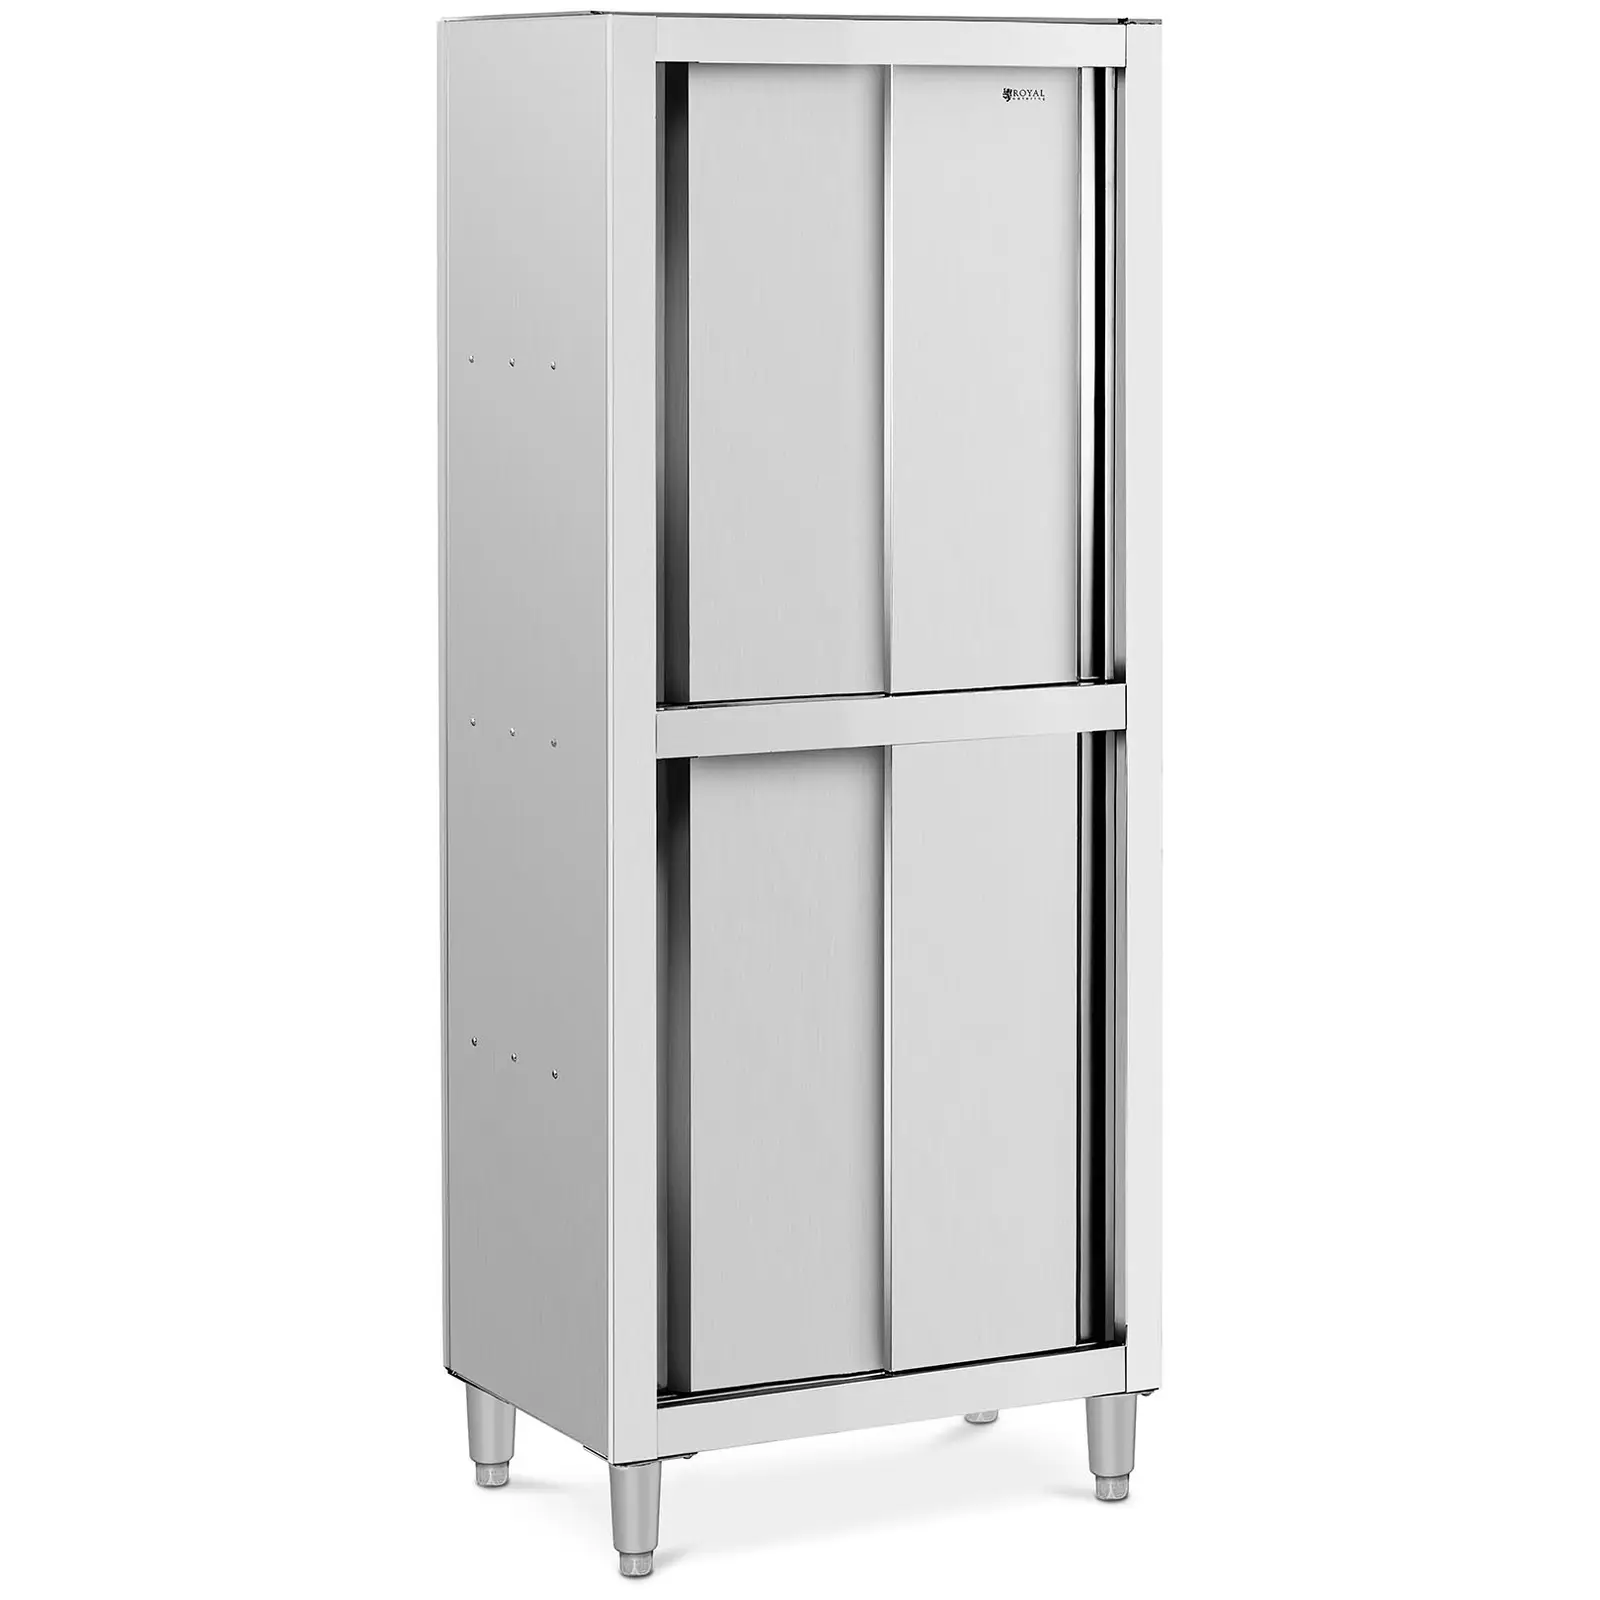 RVS kast - 800 x 500 x 1800 mm - Royal Catering